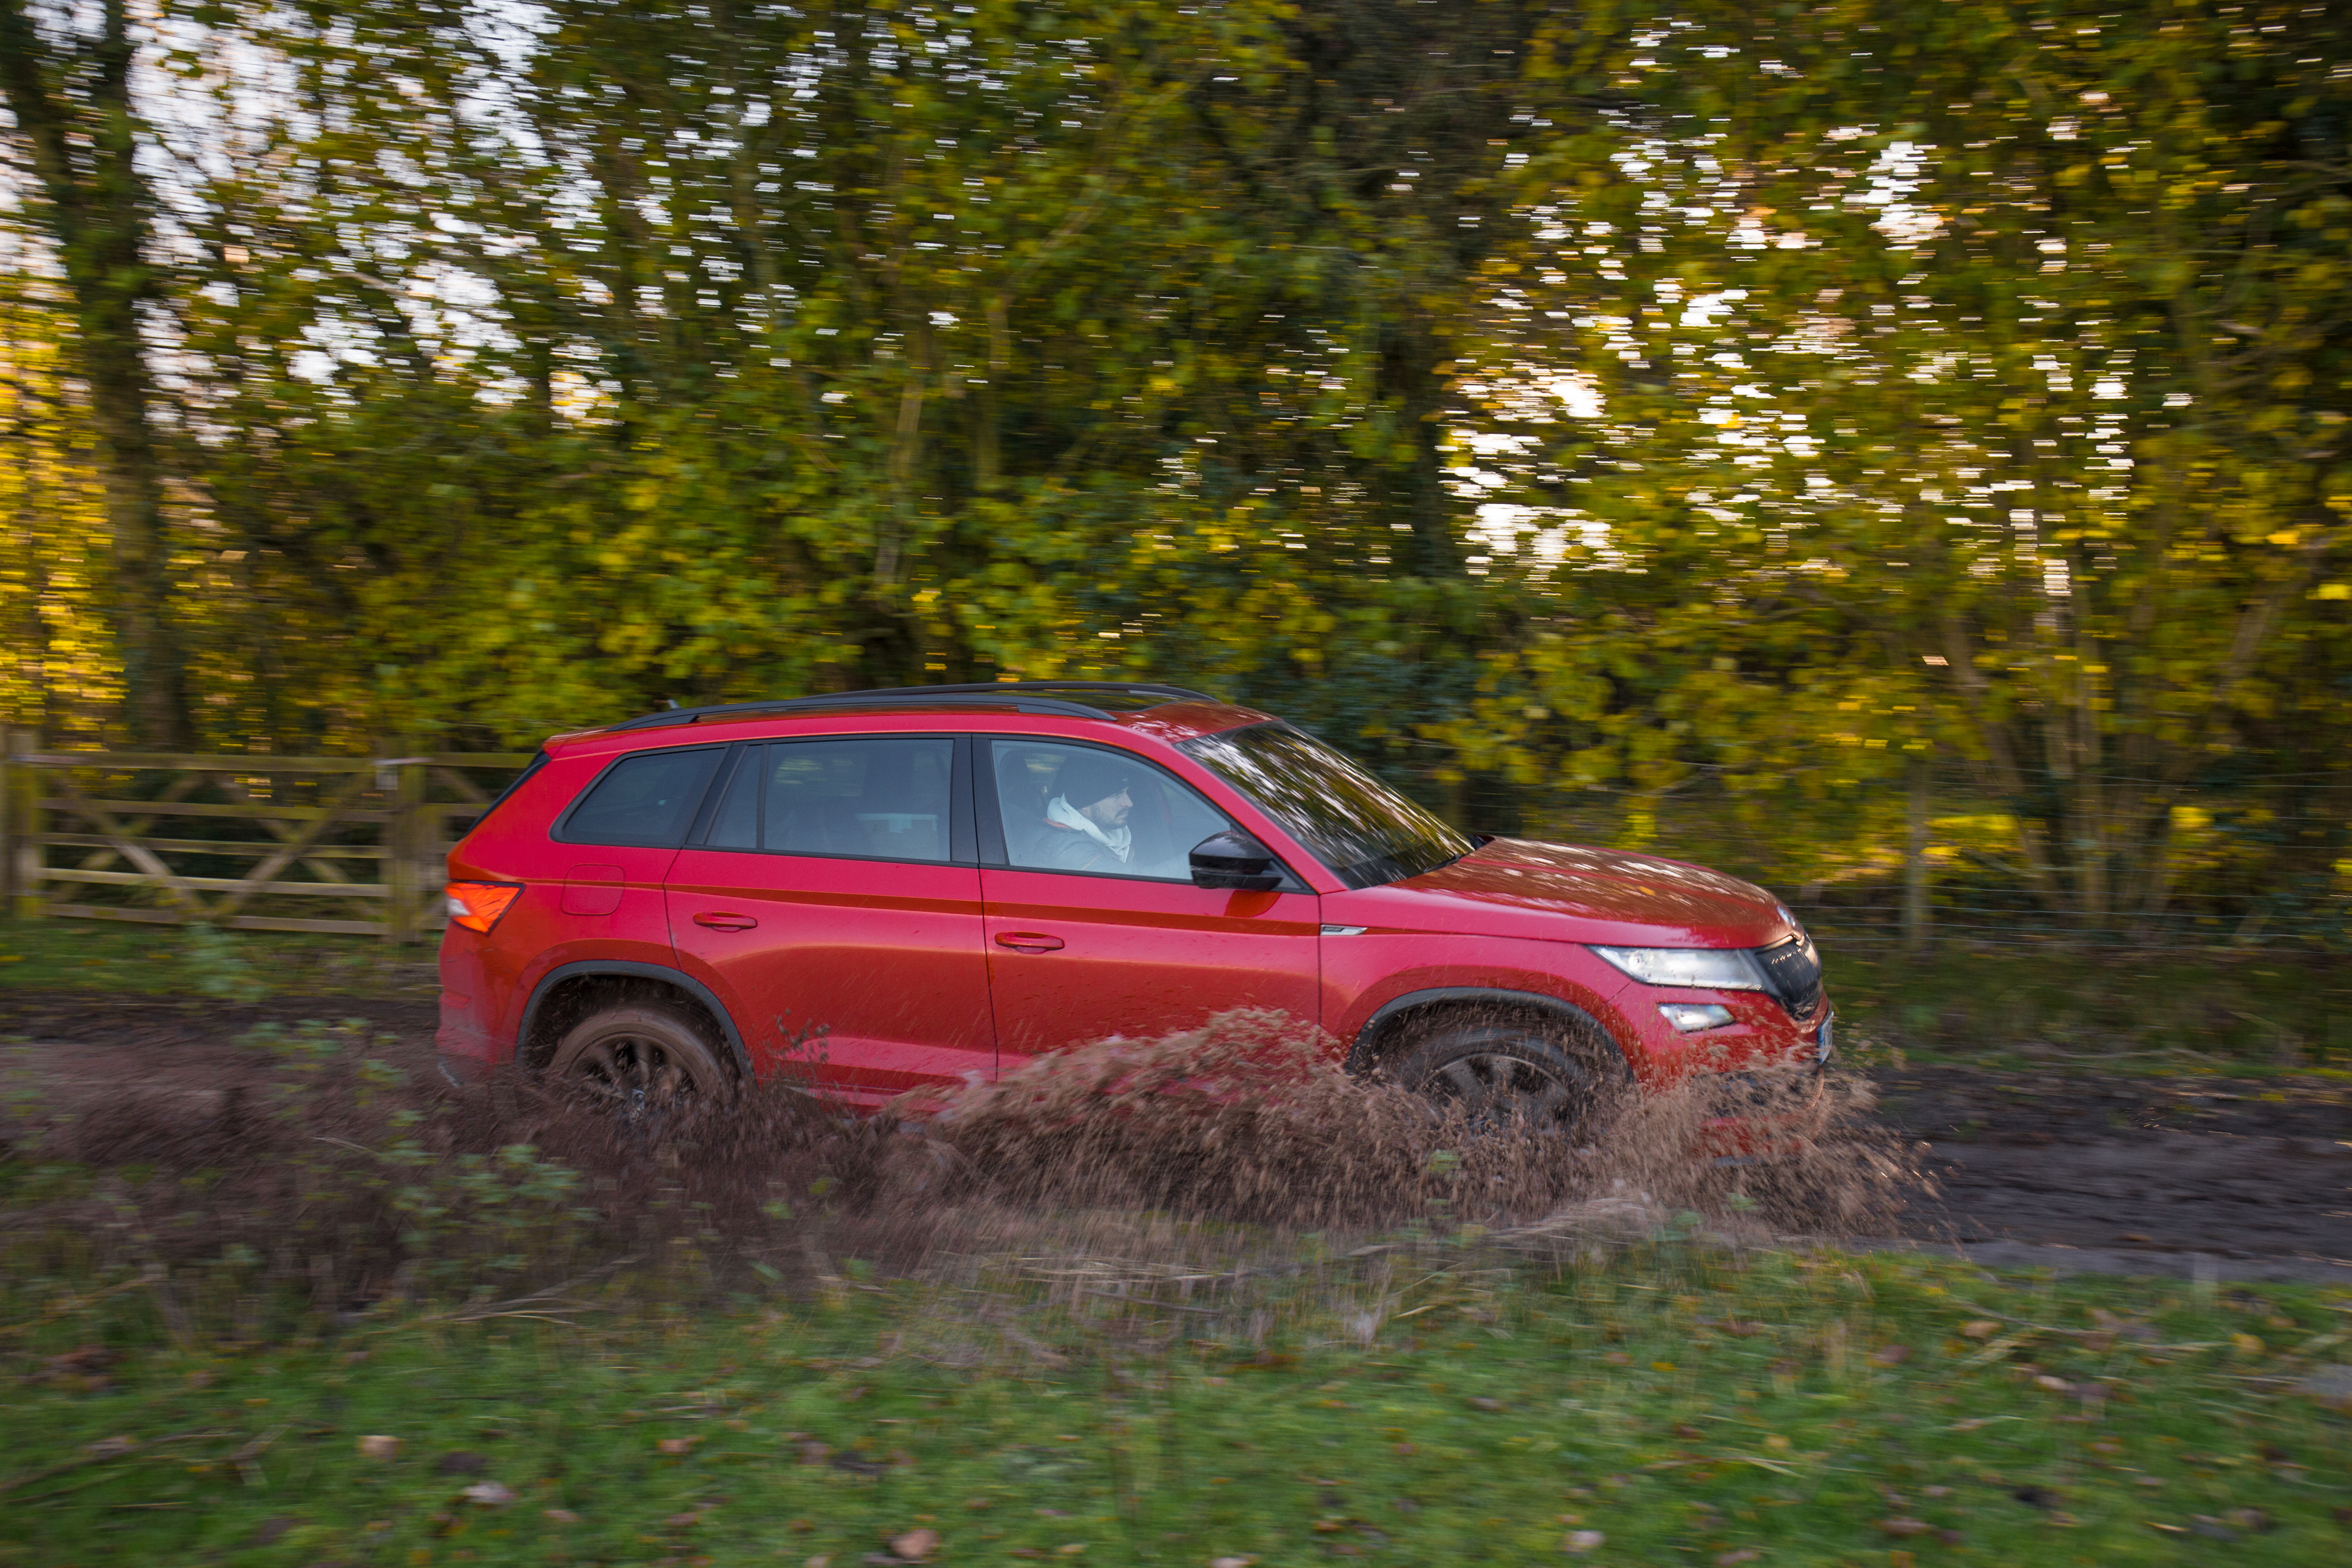 Even muddy lanes are no match for the Kodiaq